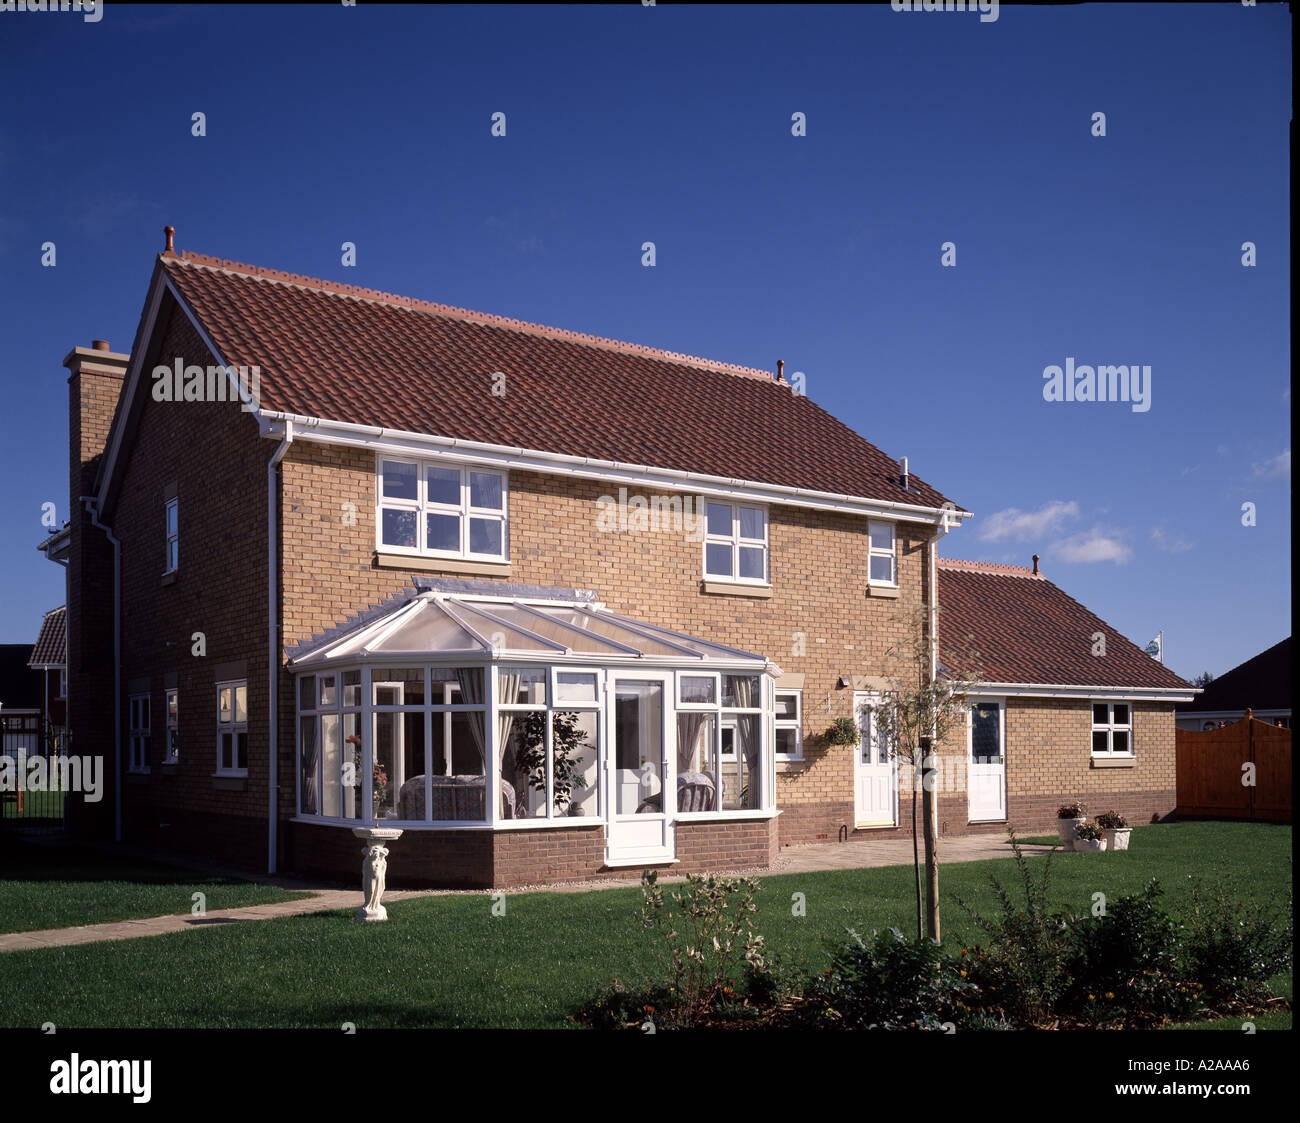 Rear elevation of  new detached brick house with pitched roof and conservatory. Stock Photo